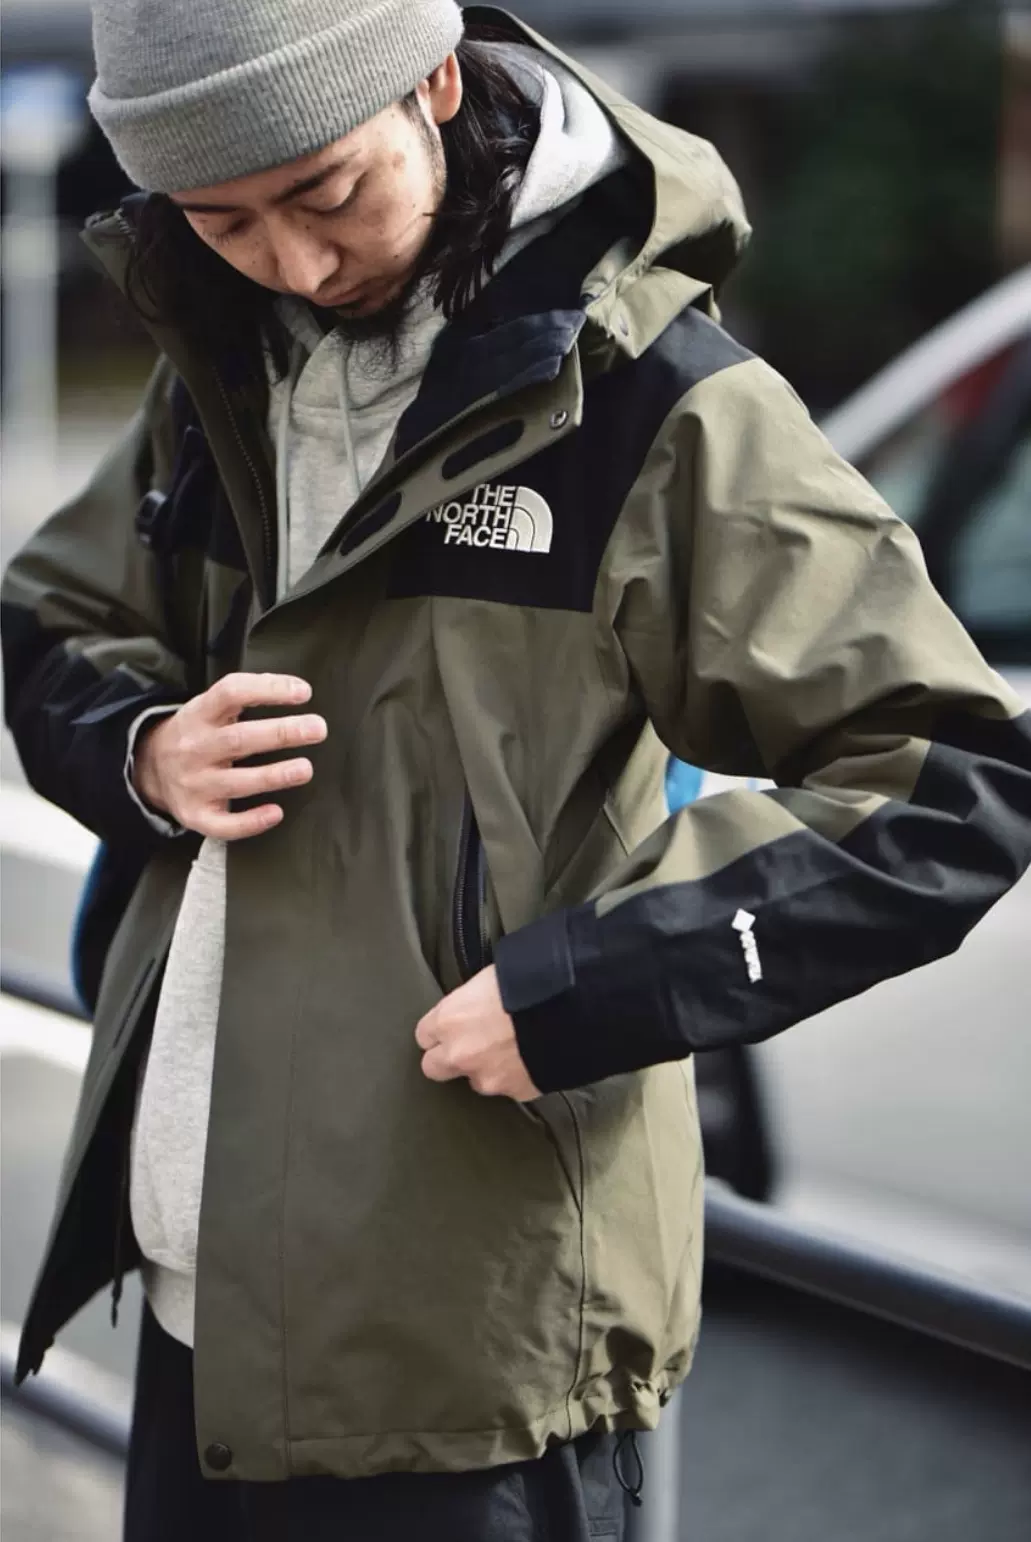 THE NORTH FACE MOUNTAIN JACKET 61800-